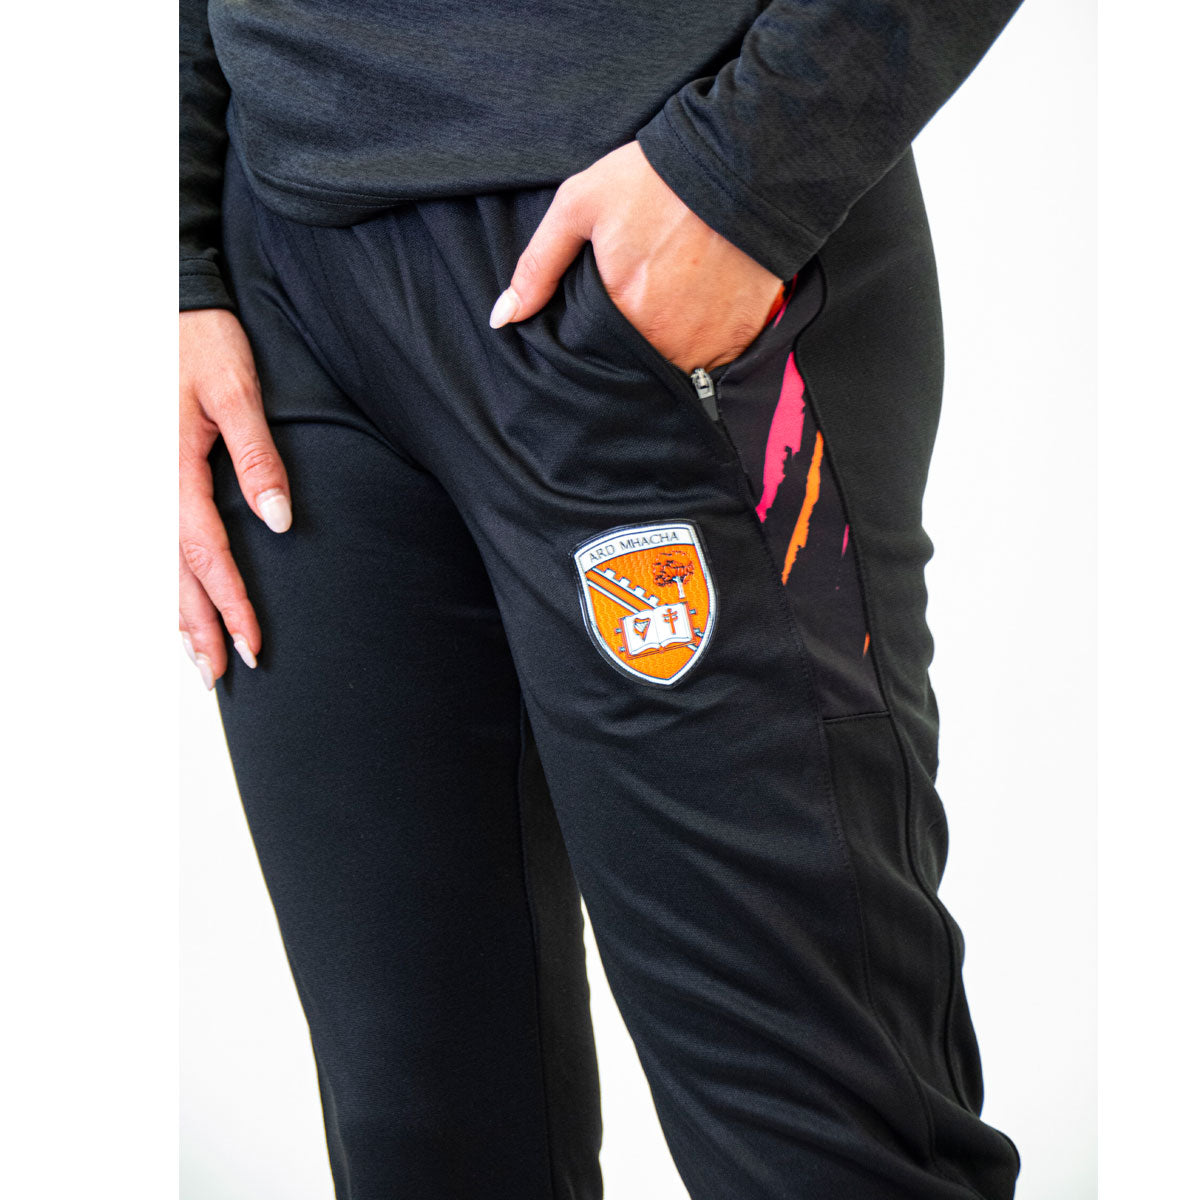 Mc Keever Armagh GAA Official Pulse Skinny Pants - Youth - Black/Pink/Orange